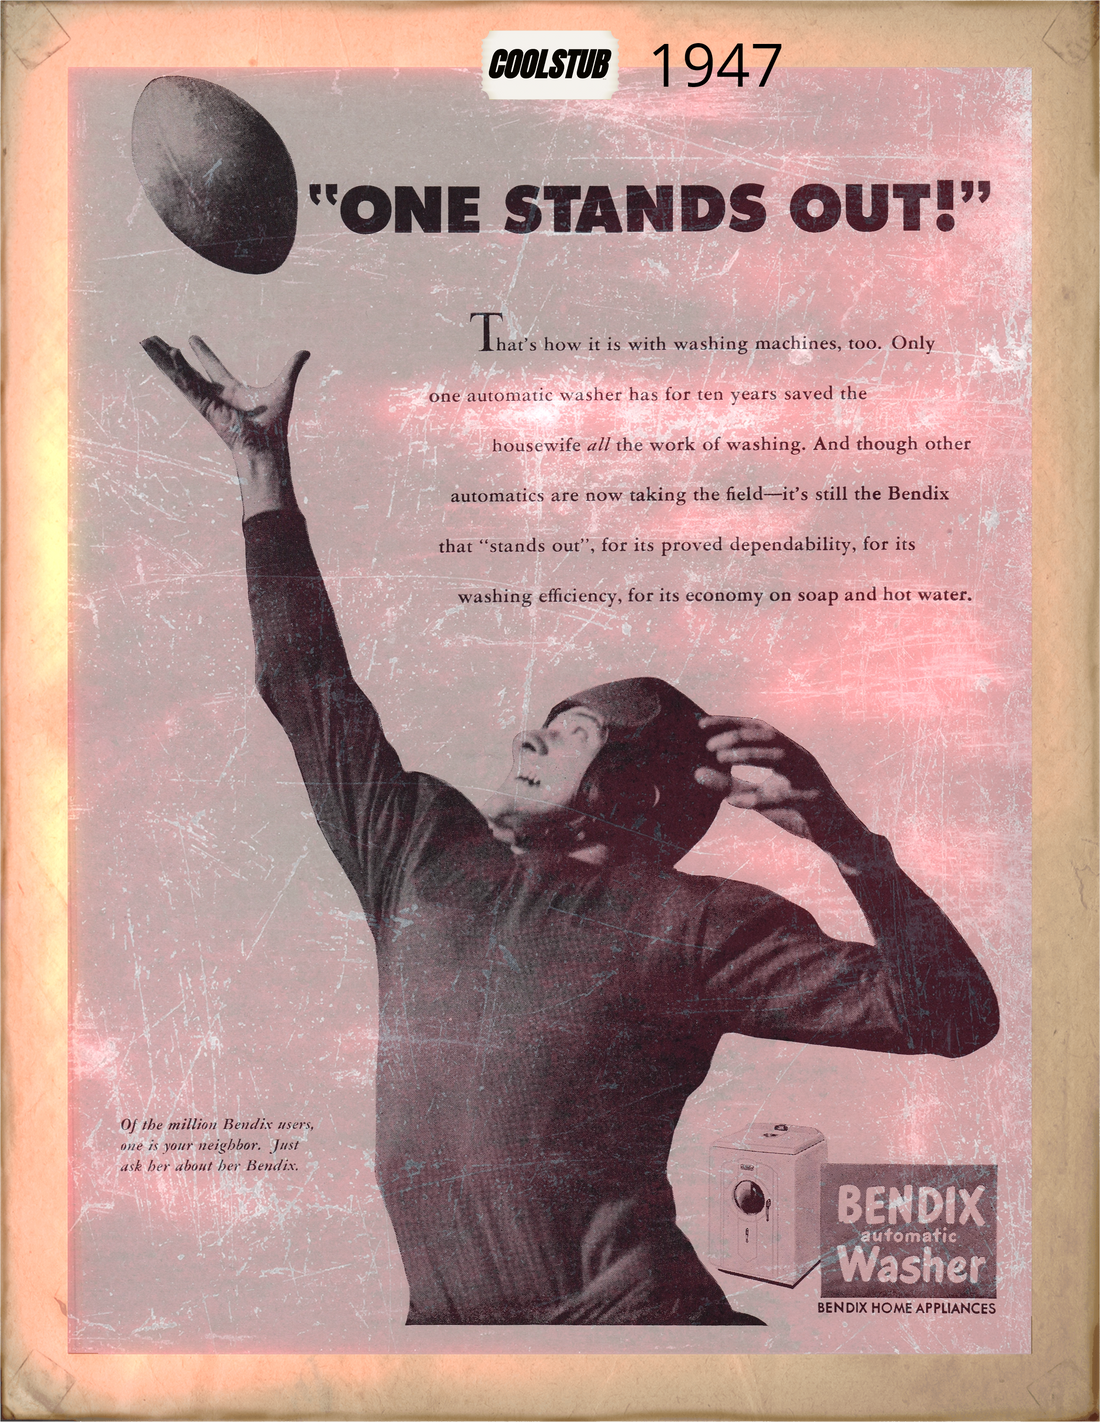 Best Vintage Football Ads and Retro Sports Advertisements